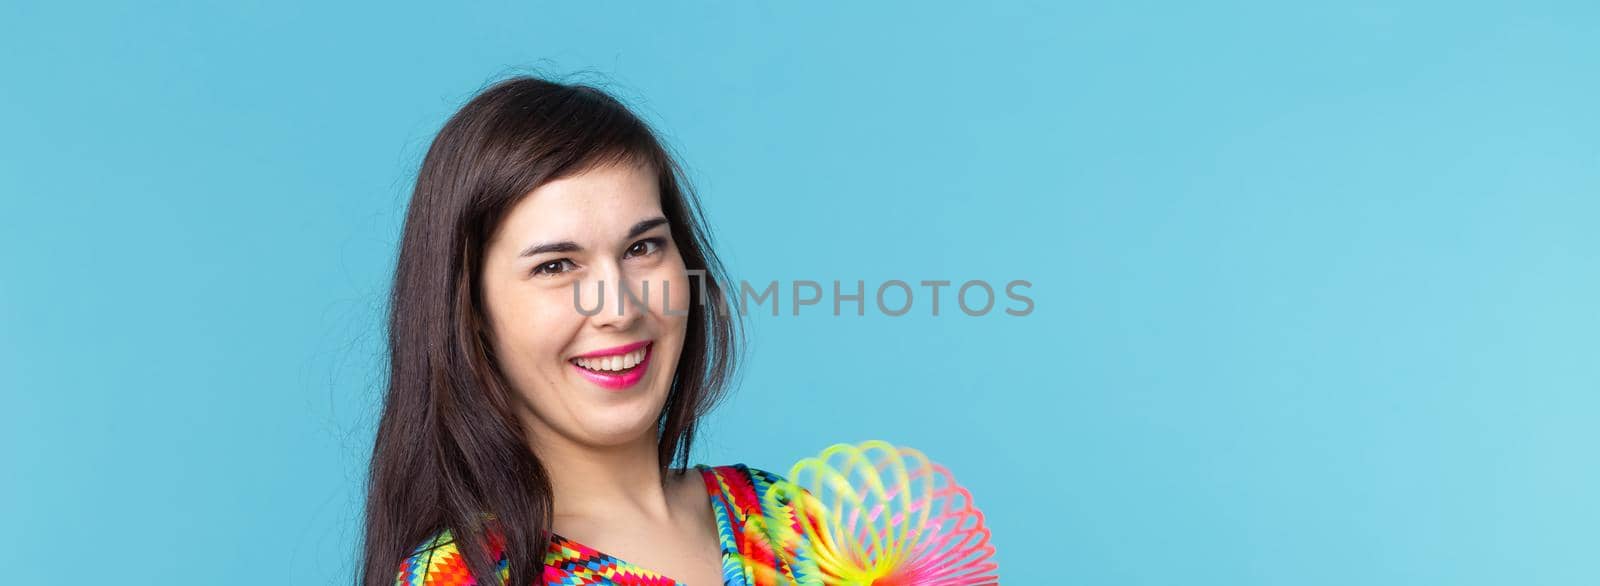 young woman playing with a slinky on blue background by Satura86